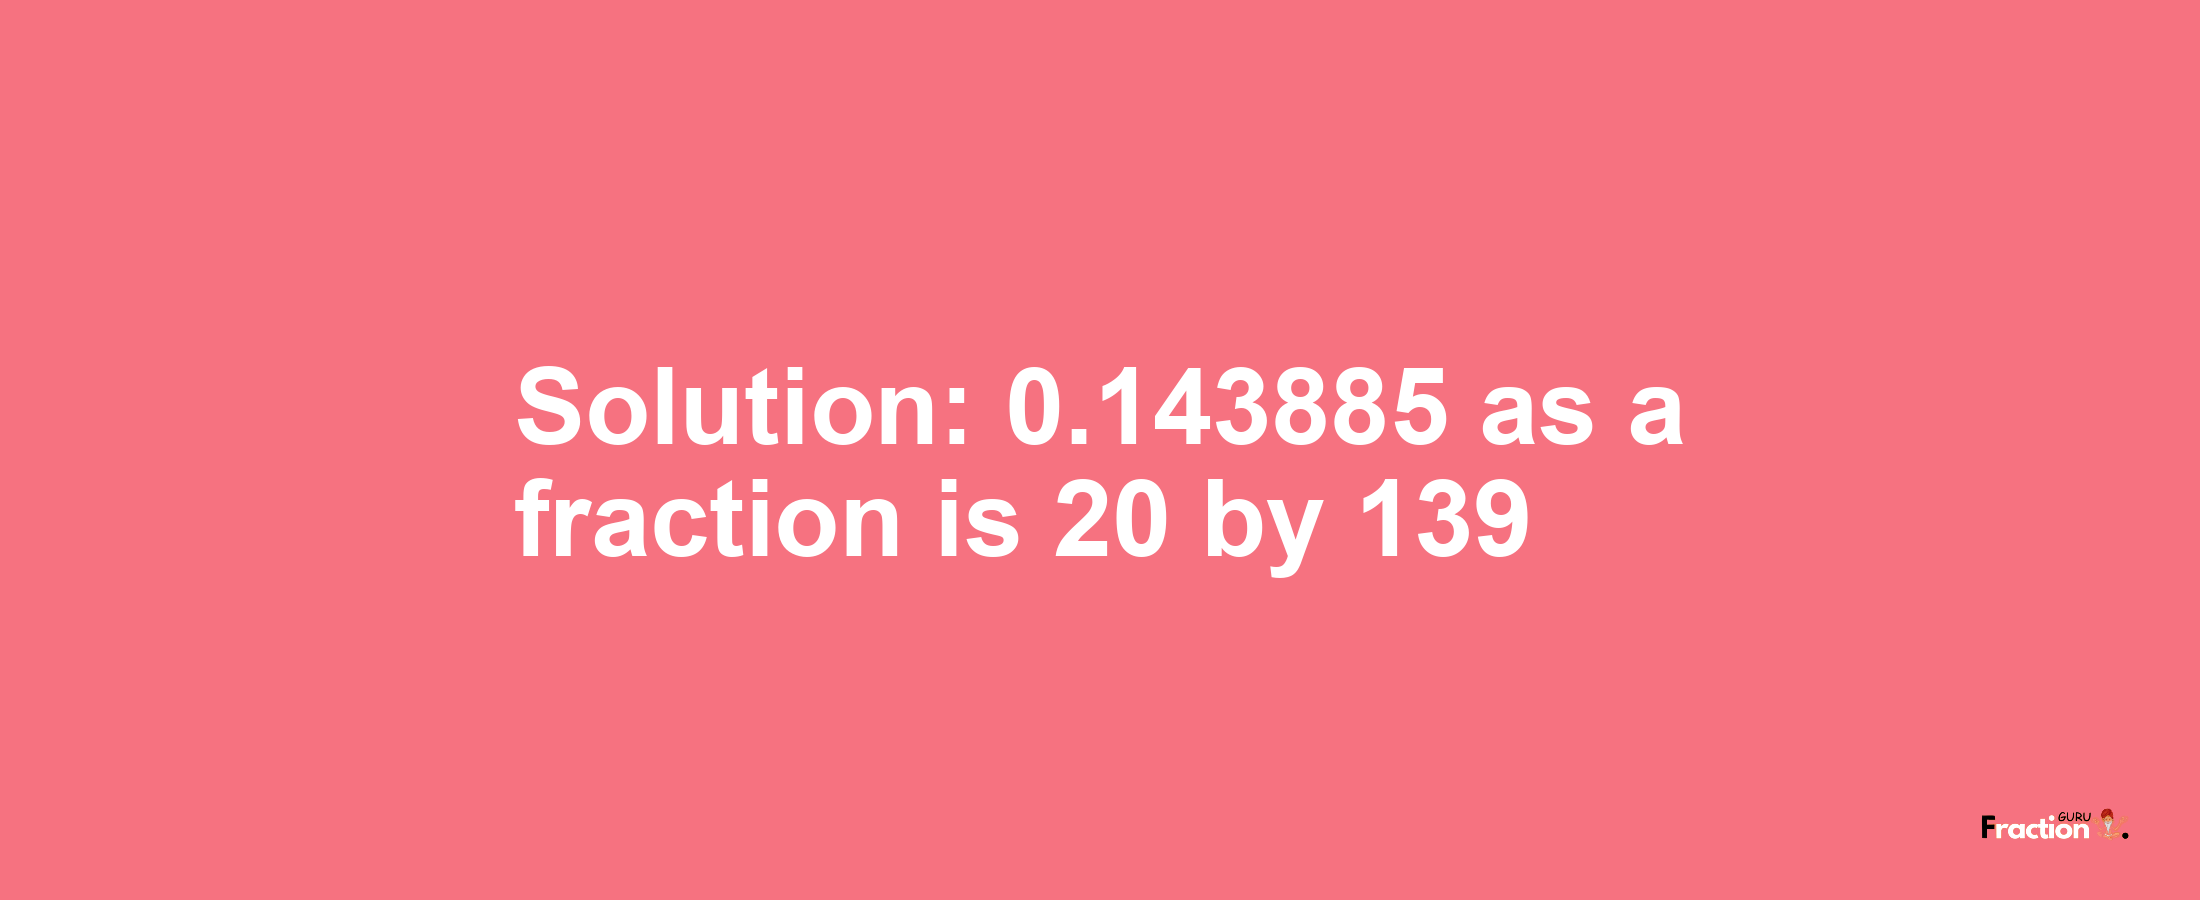 Solution:0.143885 as a fraction is 20/139